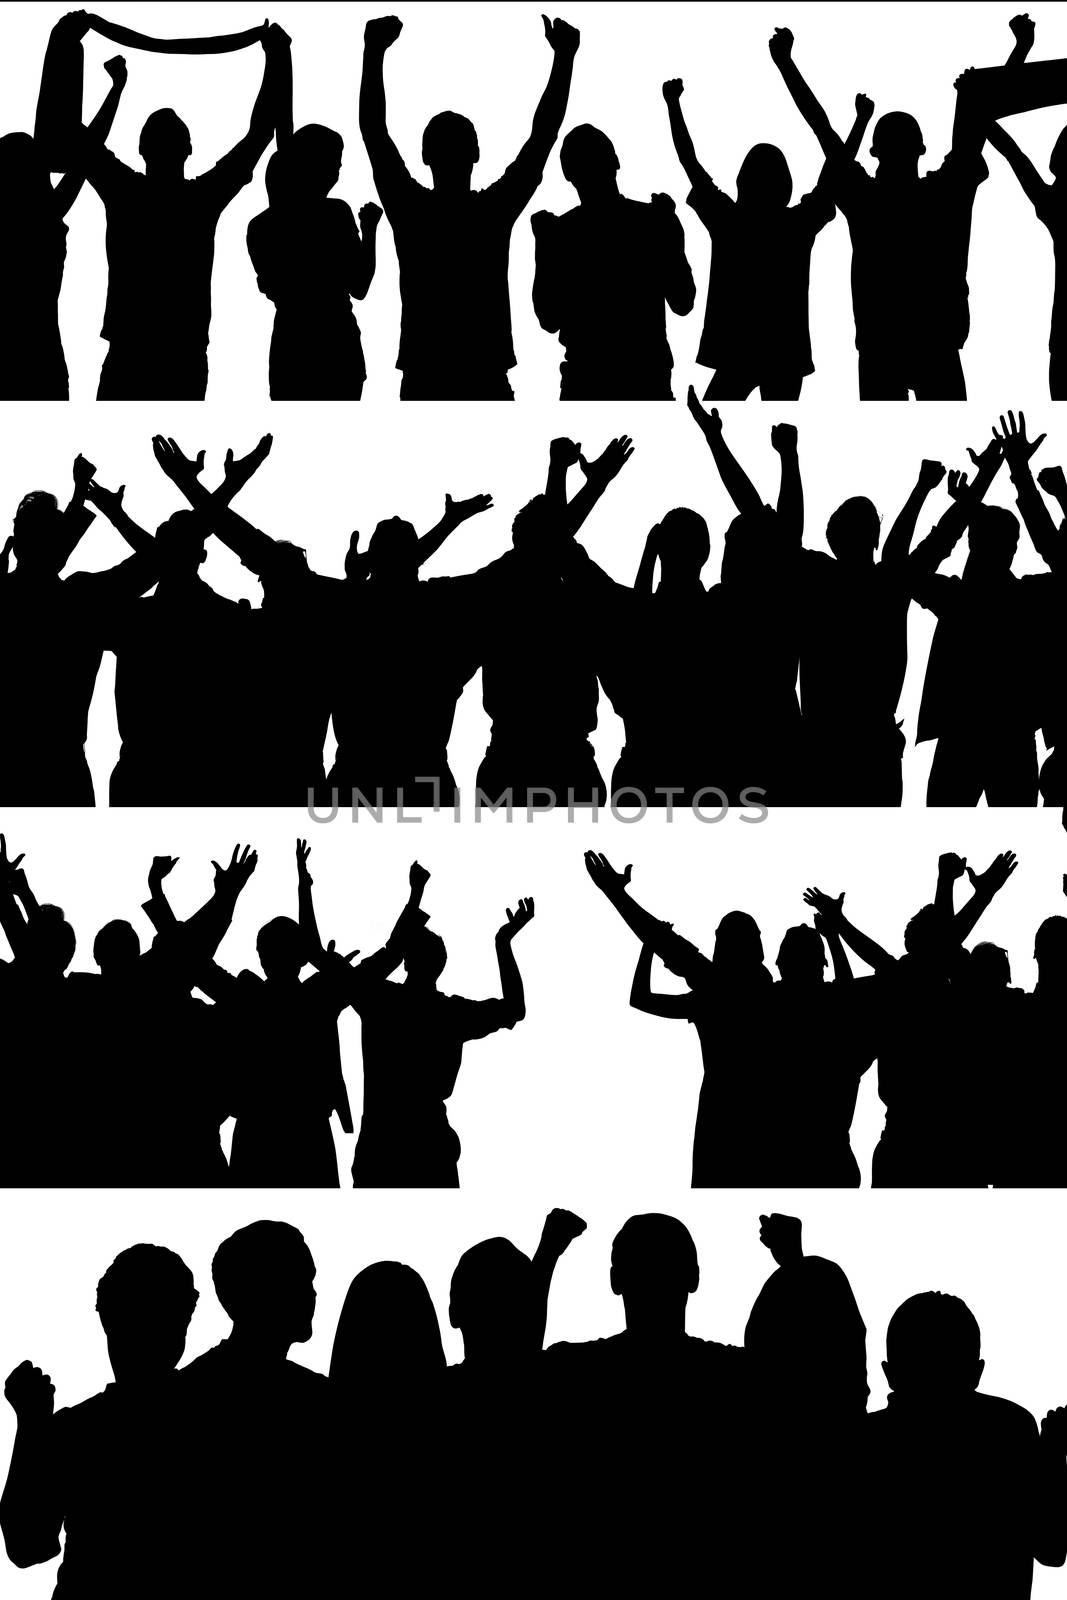 Composite image of people enjoying together in a white background